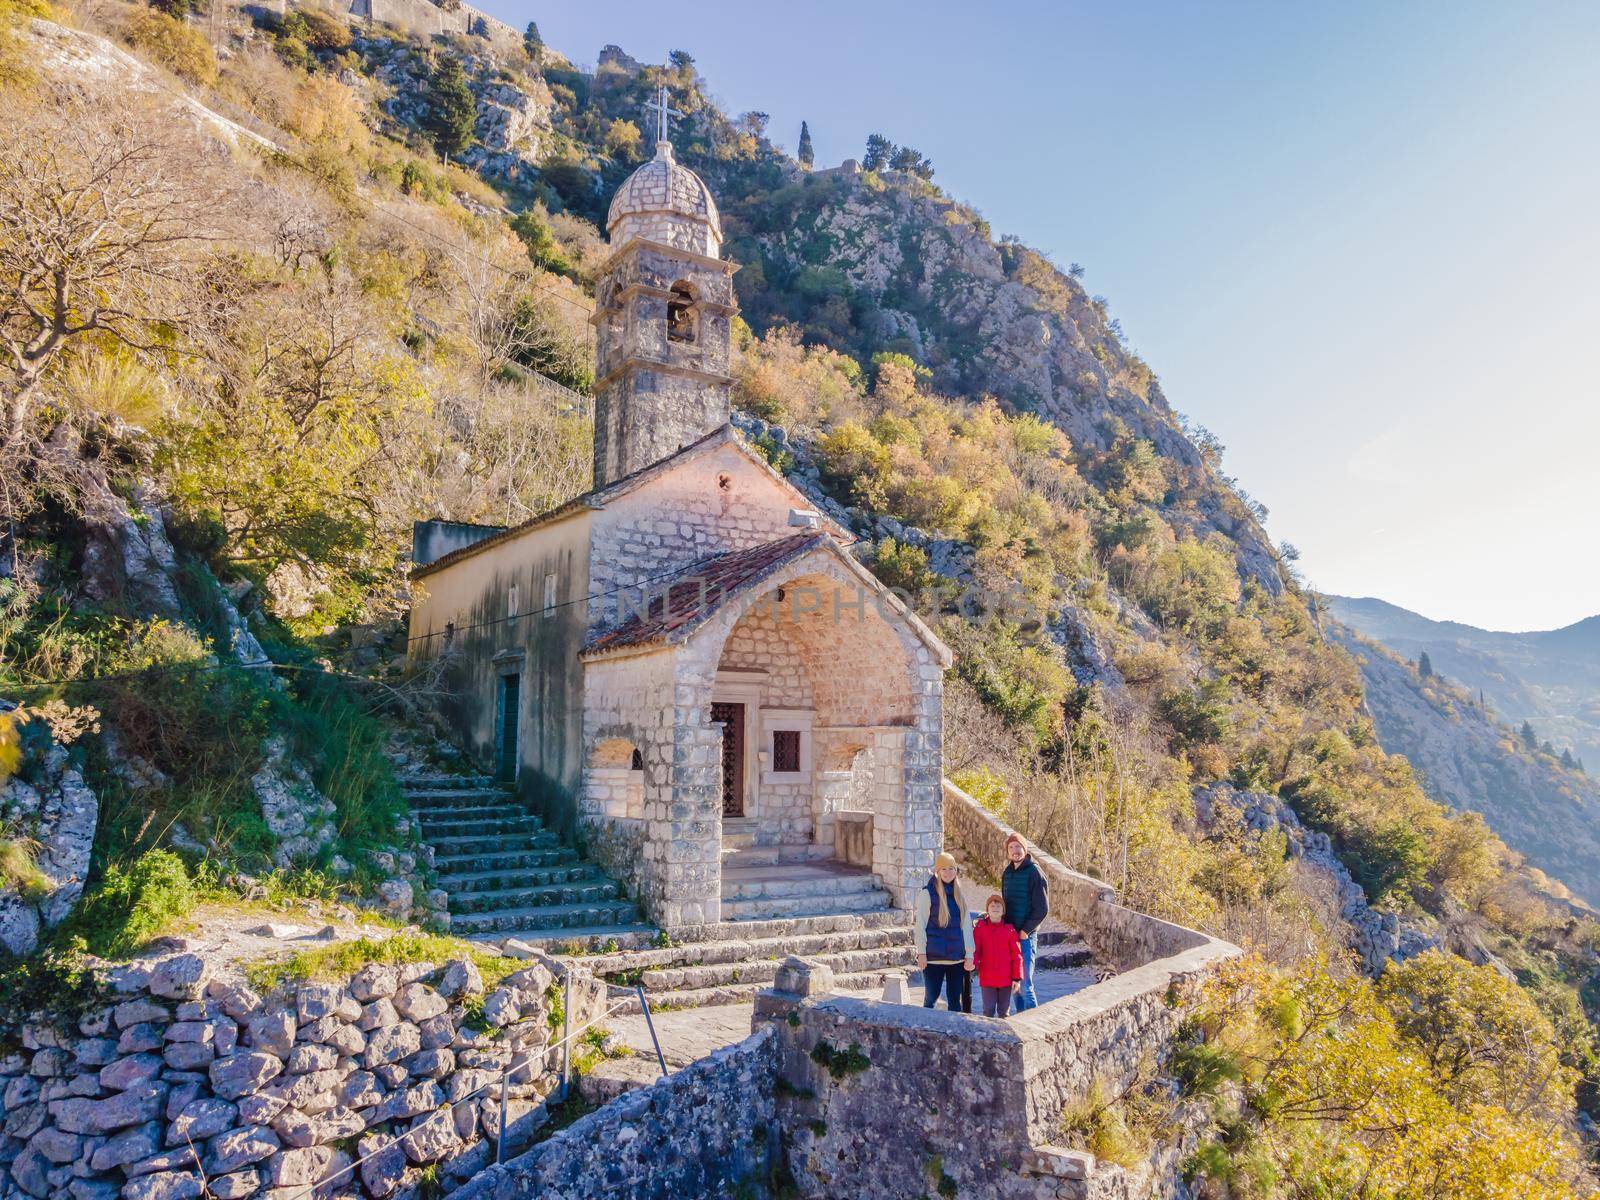 Family of hikers on Hiking in Kotor Old Town Ladder of Kotor Fortress Hiking Trail. Aerial drone view by galitskaya